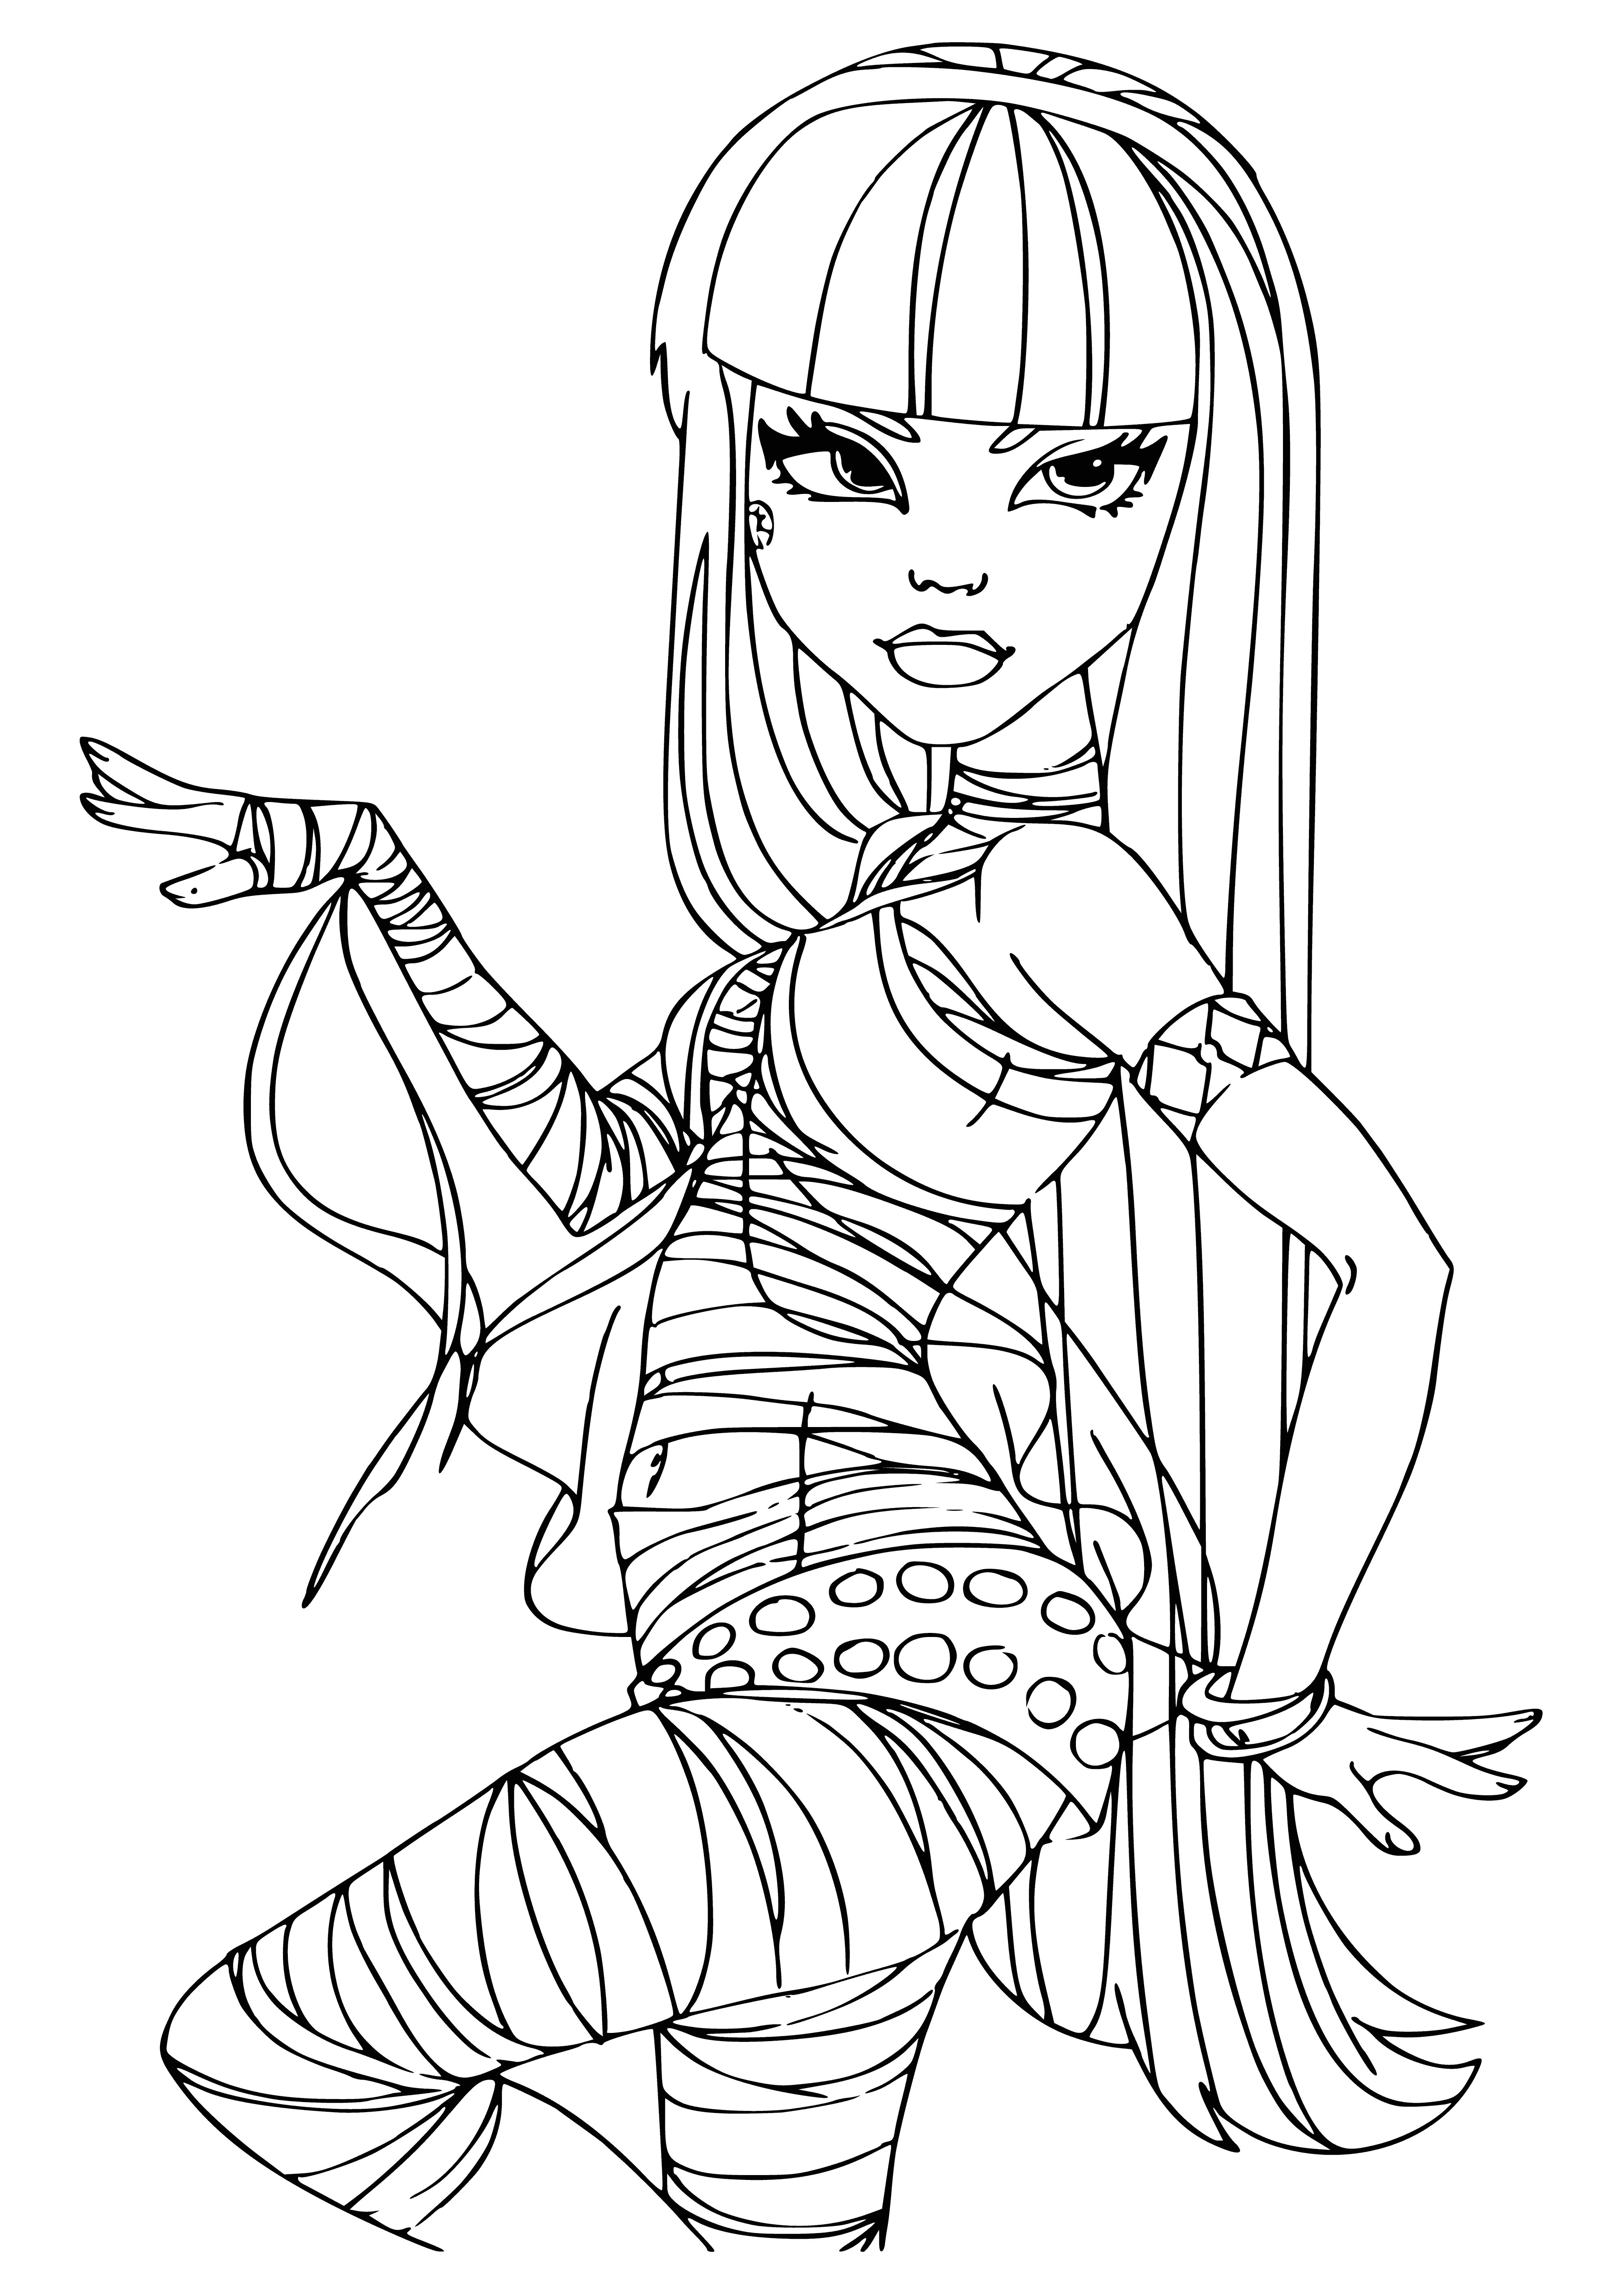 coloring page: Girl in page has dark hair, blue dress, snake around neck.